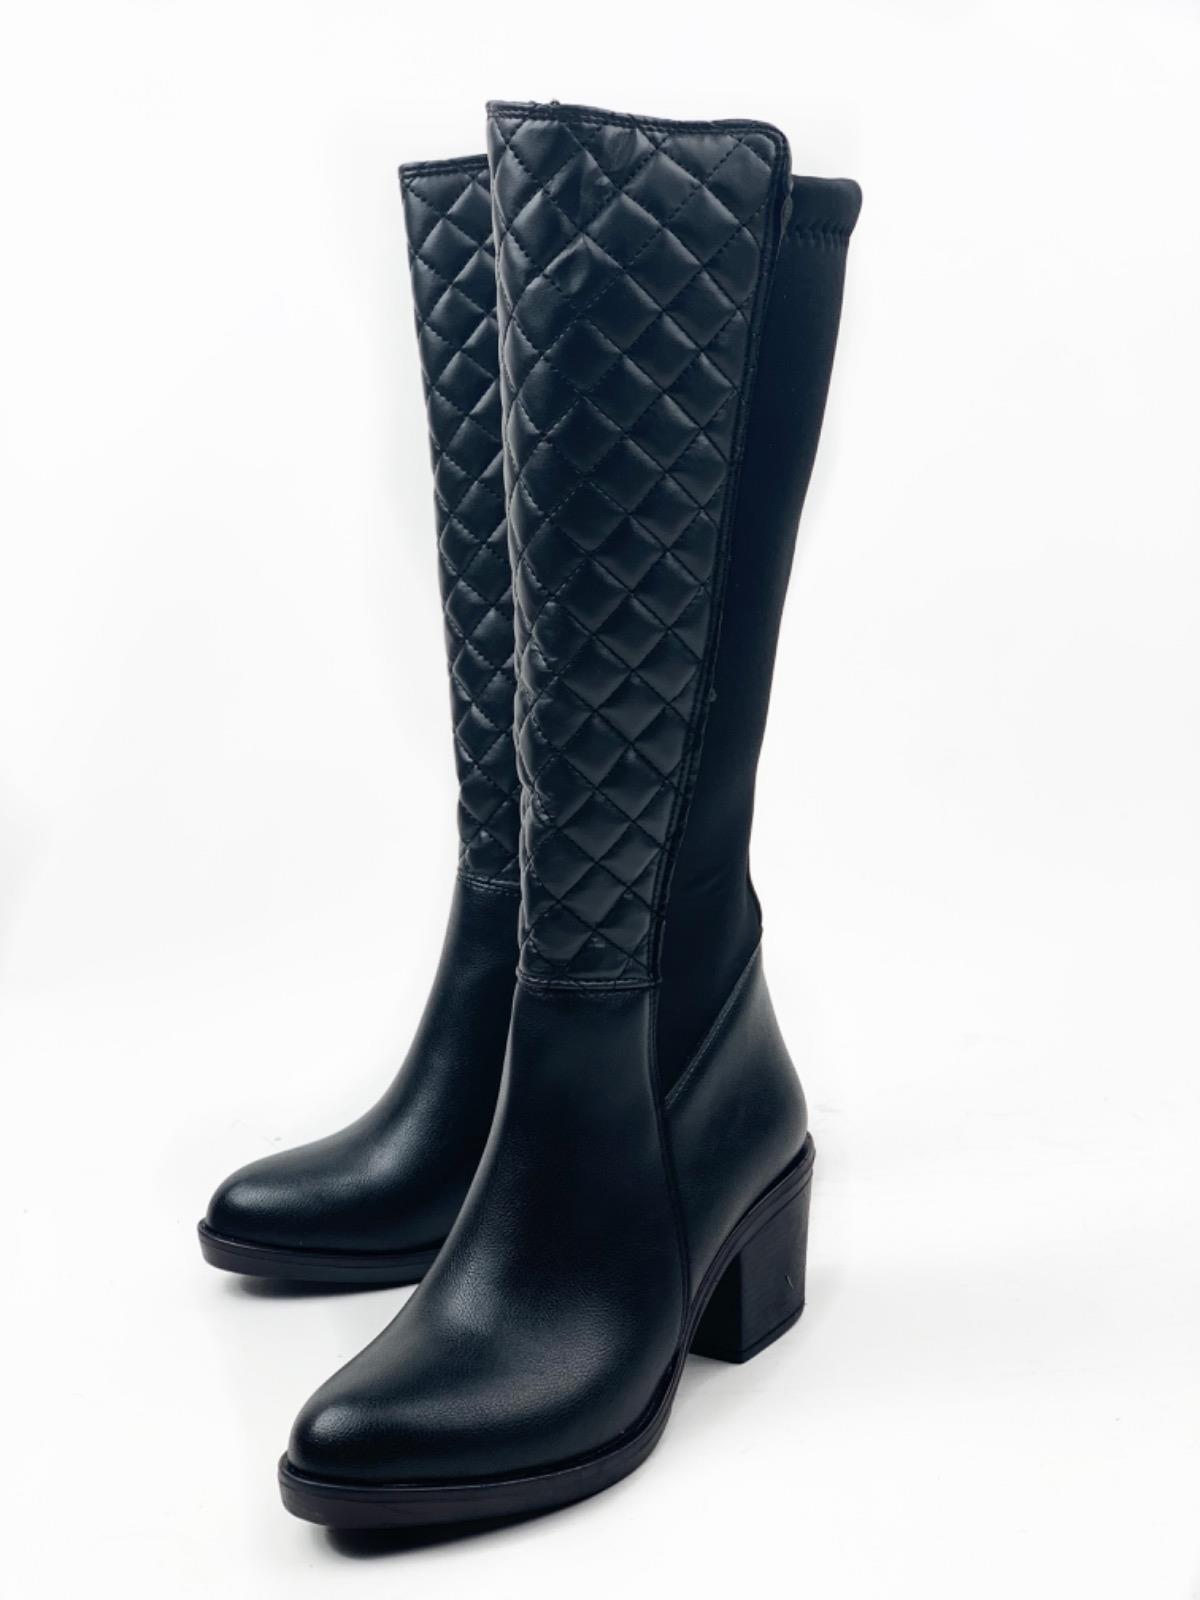 Women's Black Kapitun Patterned Heeled Stretch Boots - STREETMODE ™